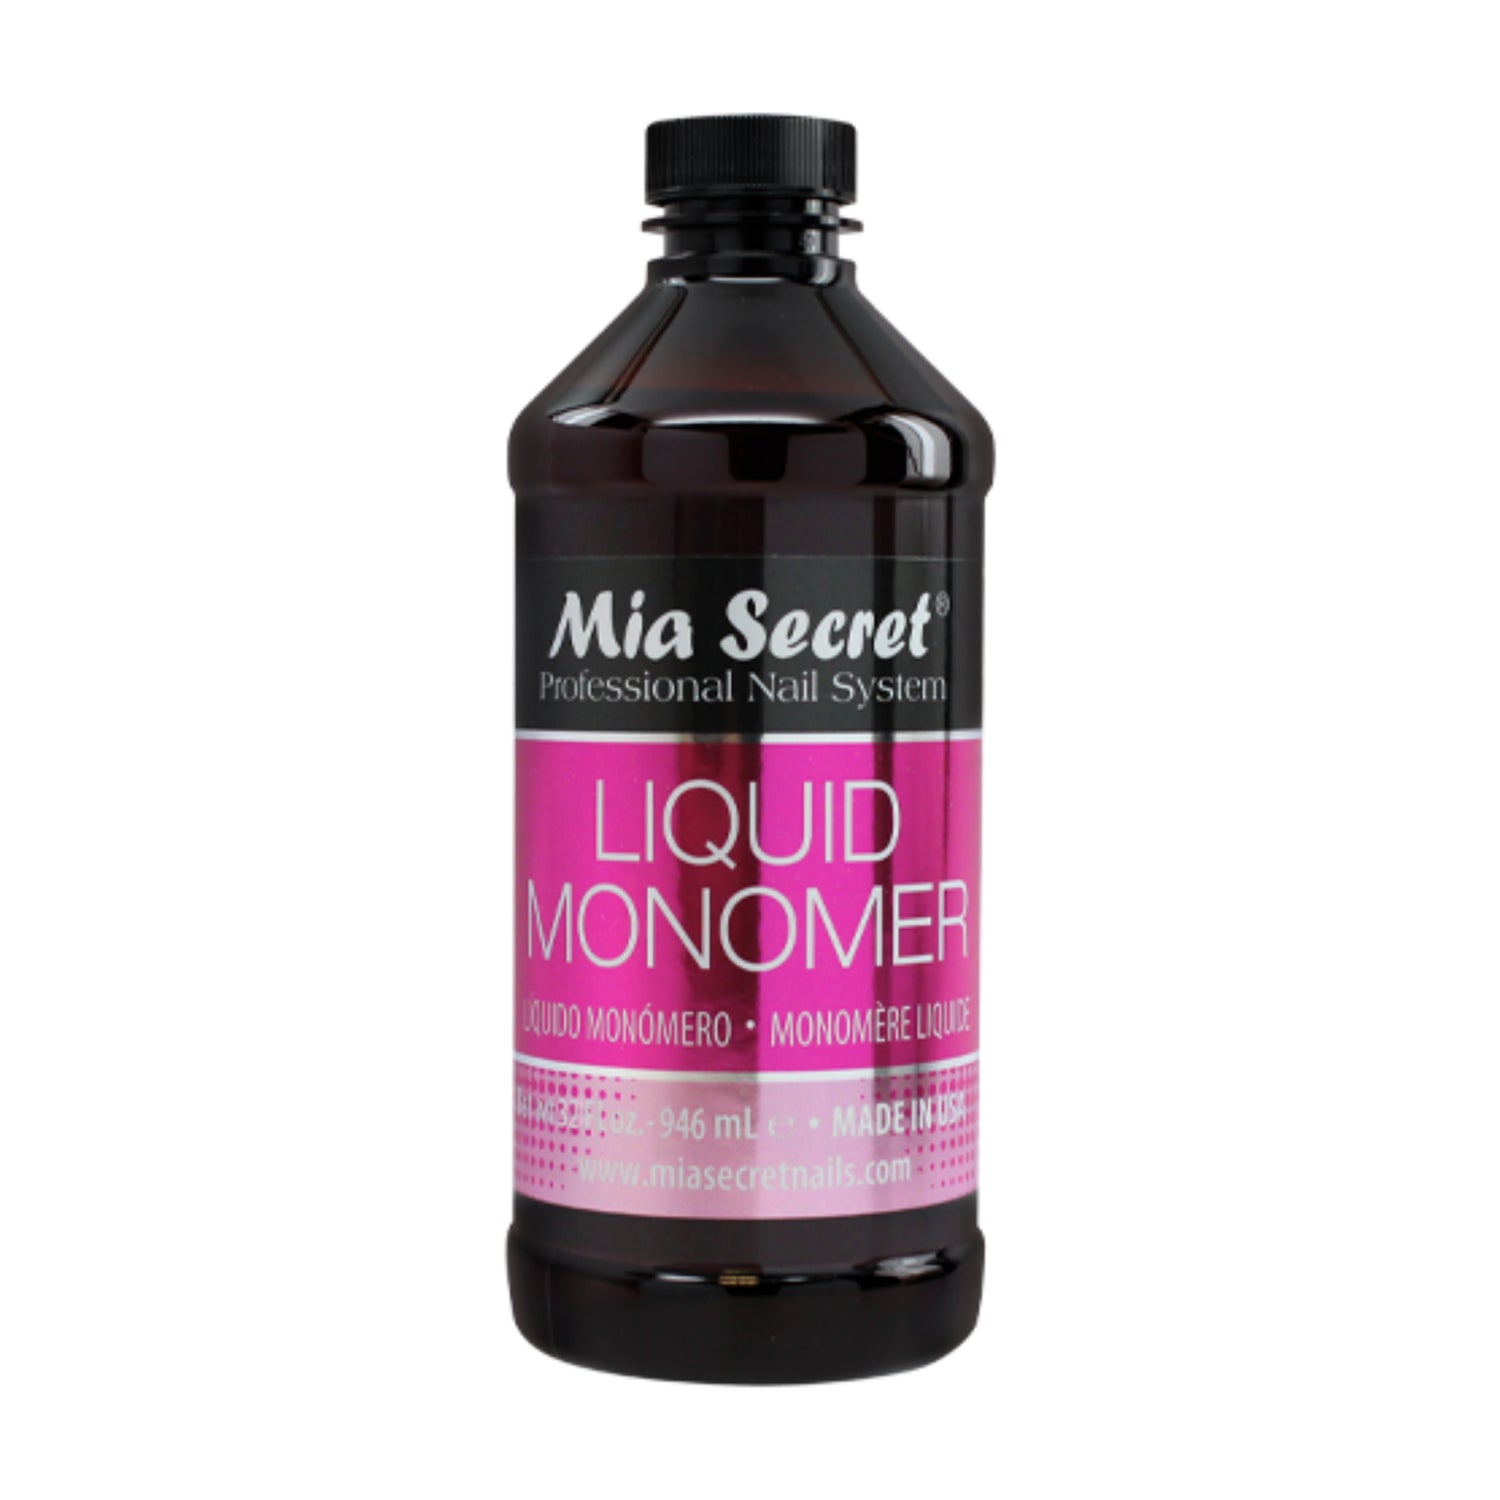 Liquid Monomer is an advanced blended EMA monomer with a non-yellowing formula, which provides outstanding flexibility, adhesion and absorption 